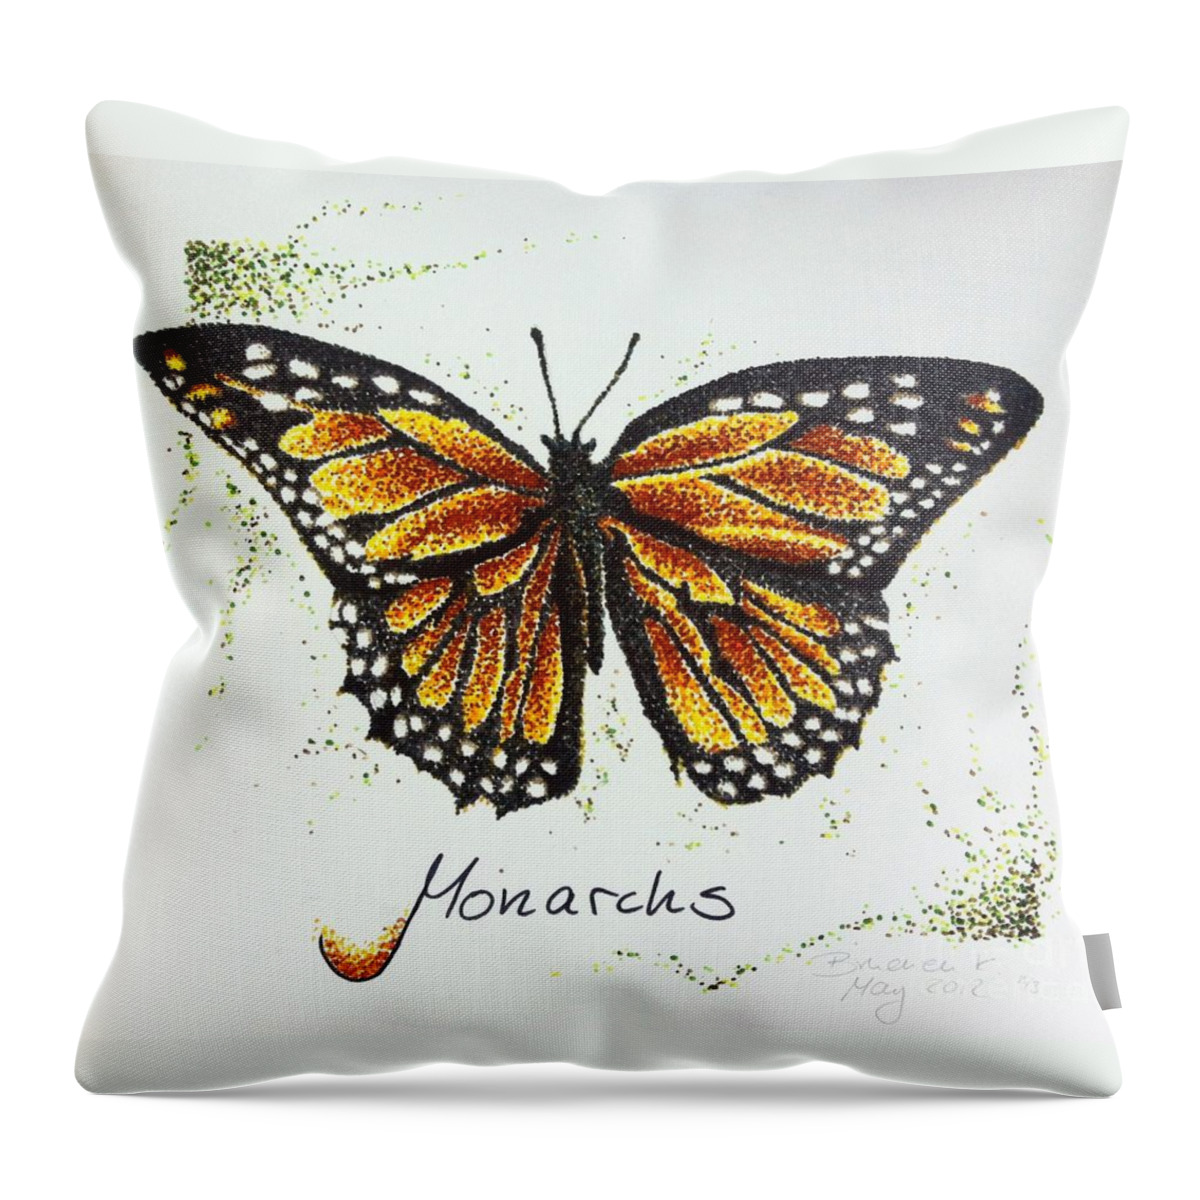 Monarch Throw Pillow featuring the drawing Monarchs - Butterfly by Katharina Bruenen